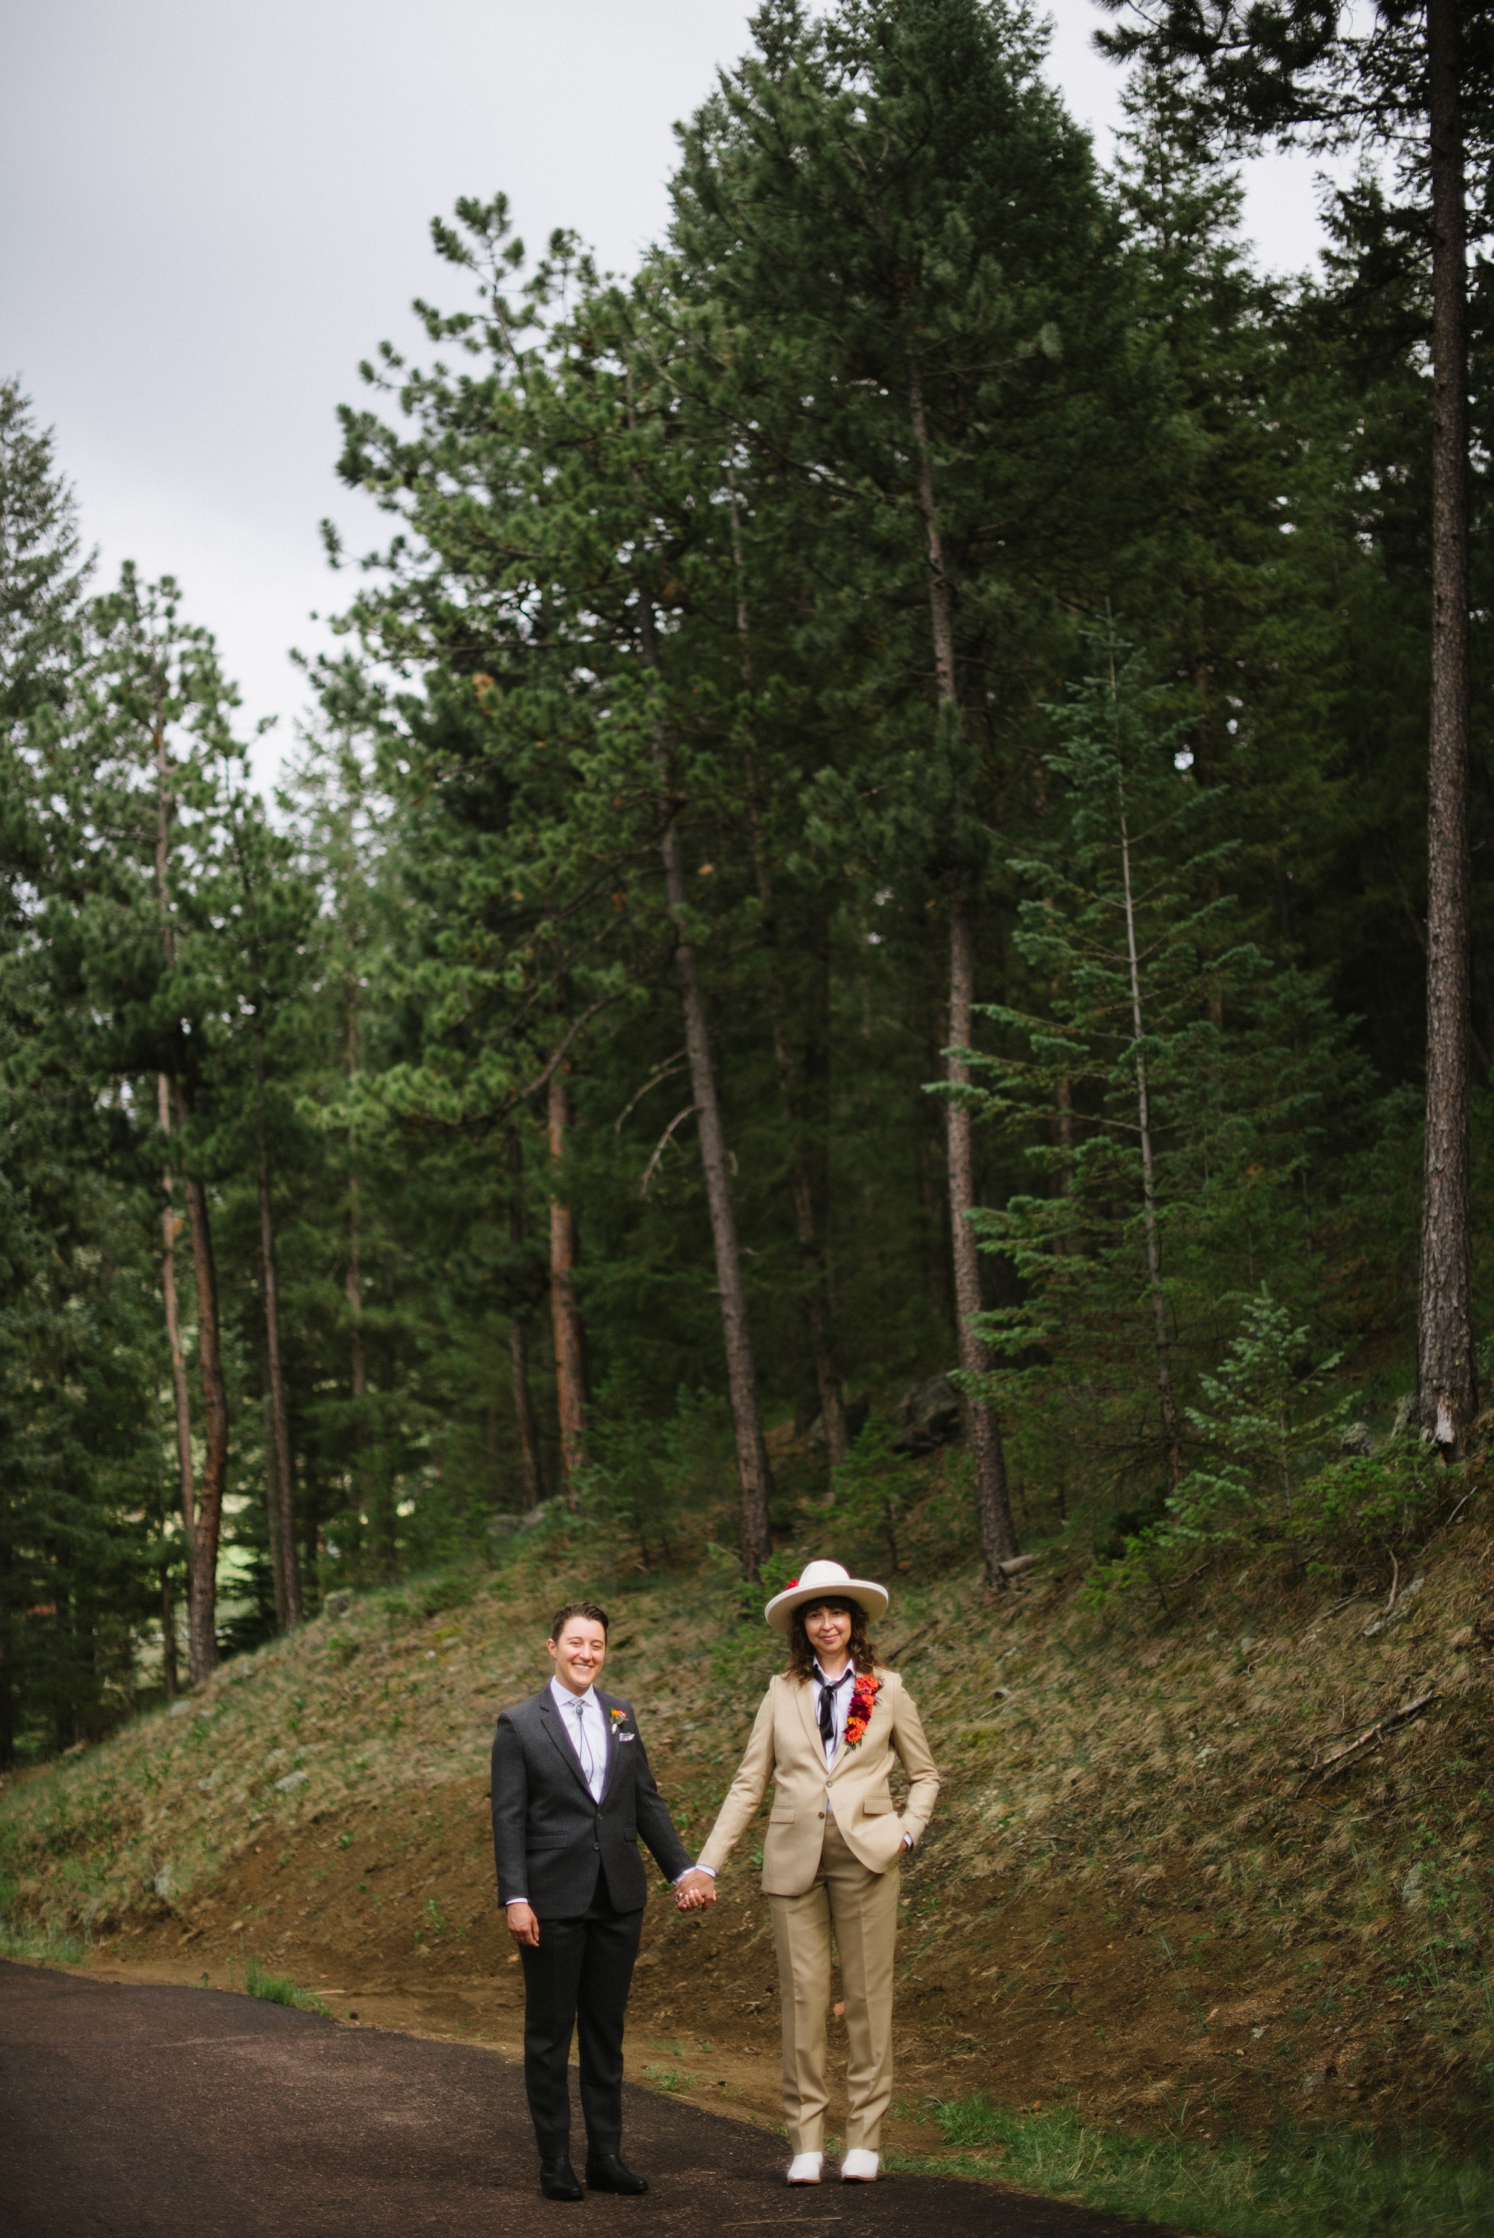 LBGTQ couple standing on asphalt road in front of forest | McArthur Weddings and Events